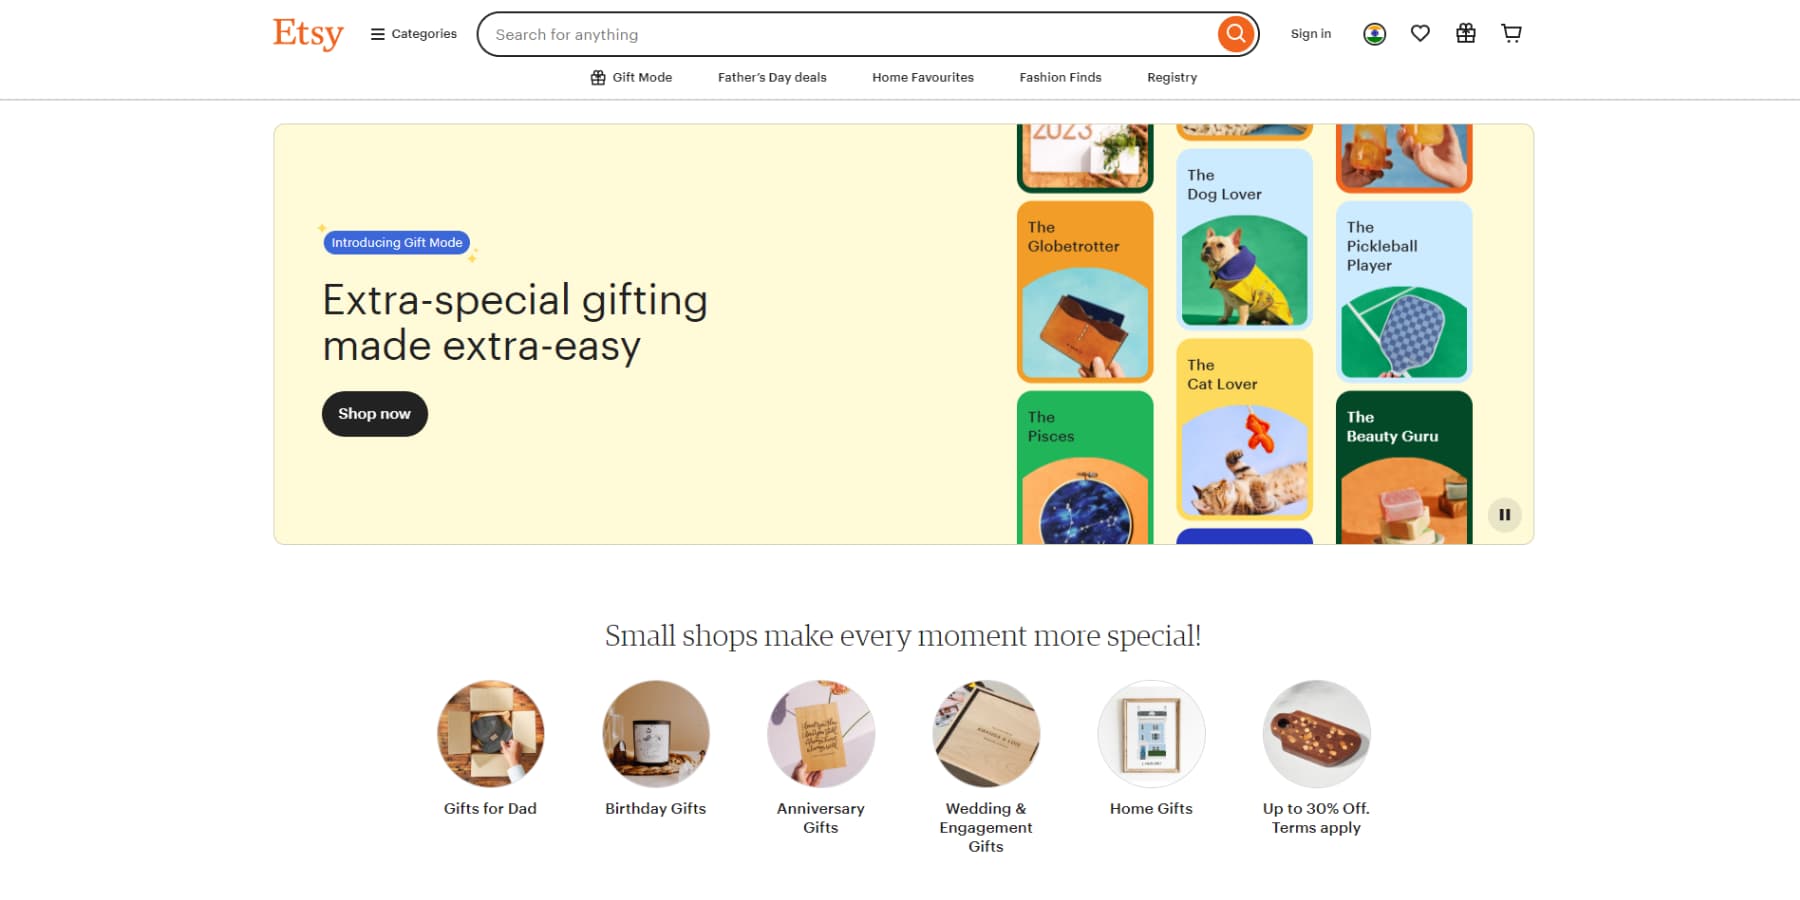 A screenshot of Etsy's homepage